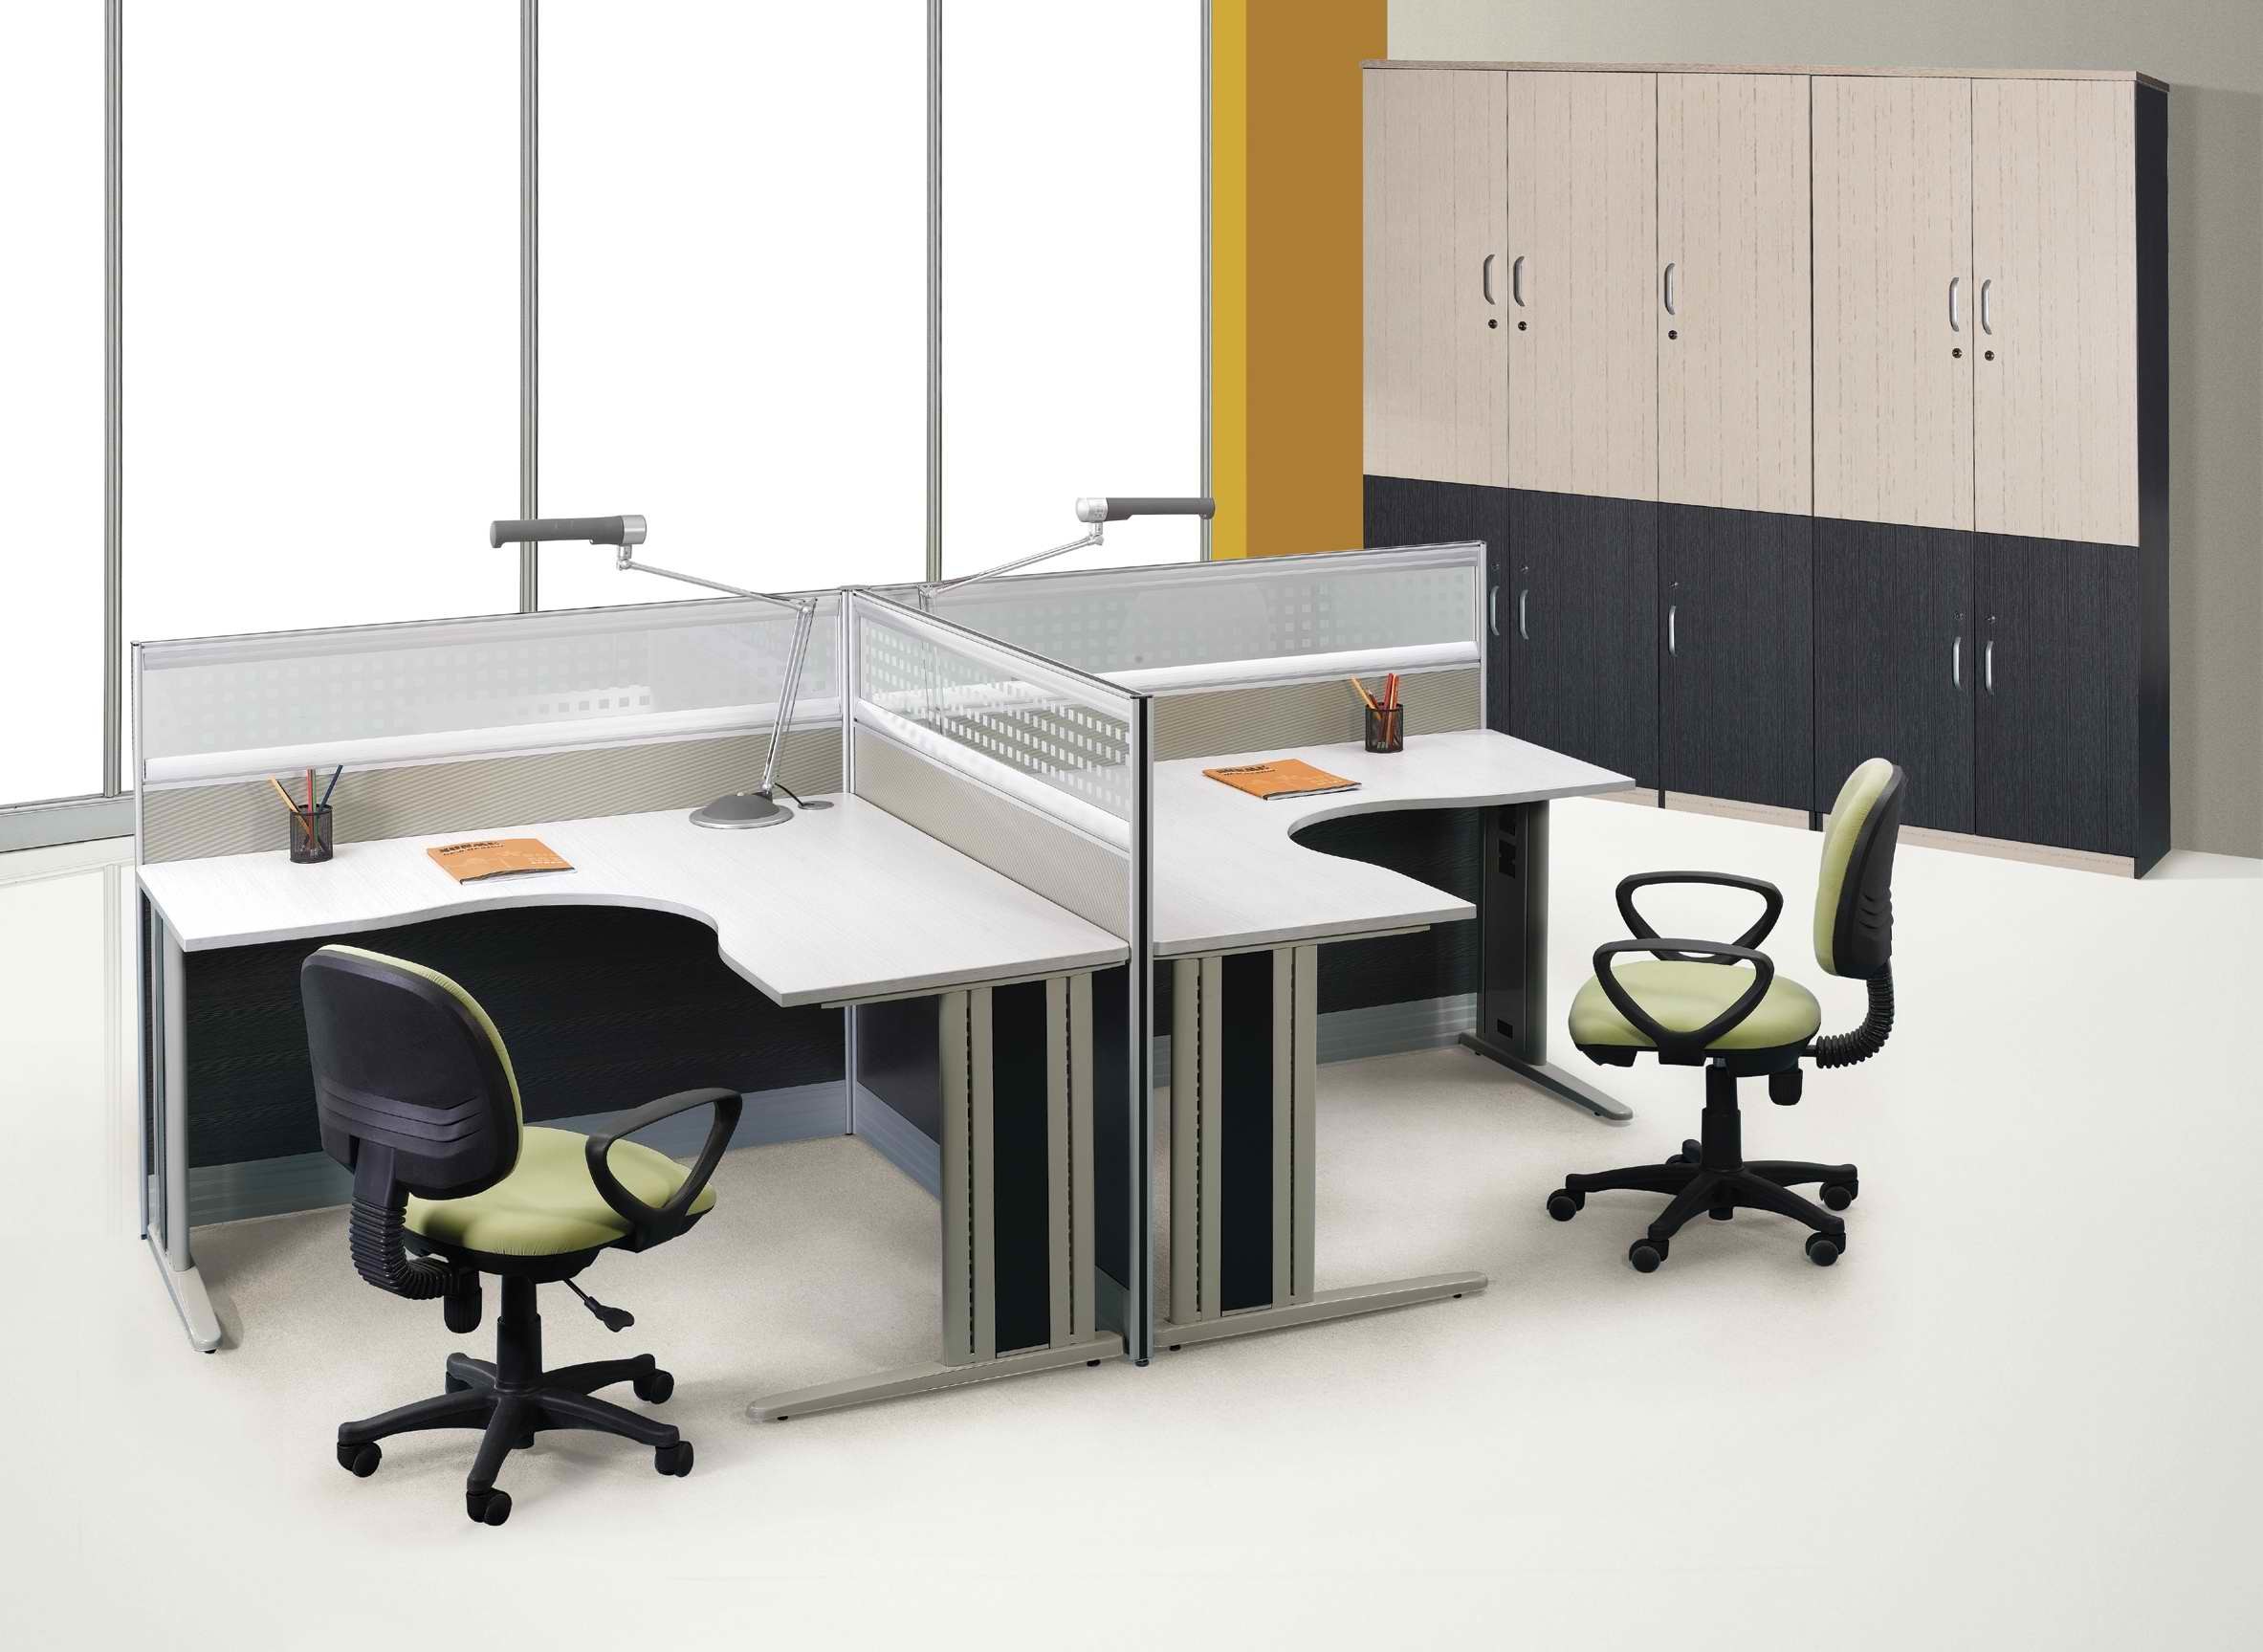 Modular Office Furniture Awesome Wallpaper Gallery 1n38ng 2366×1727